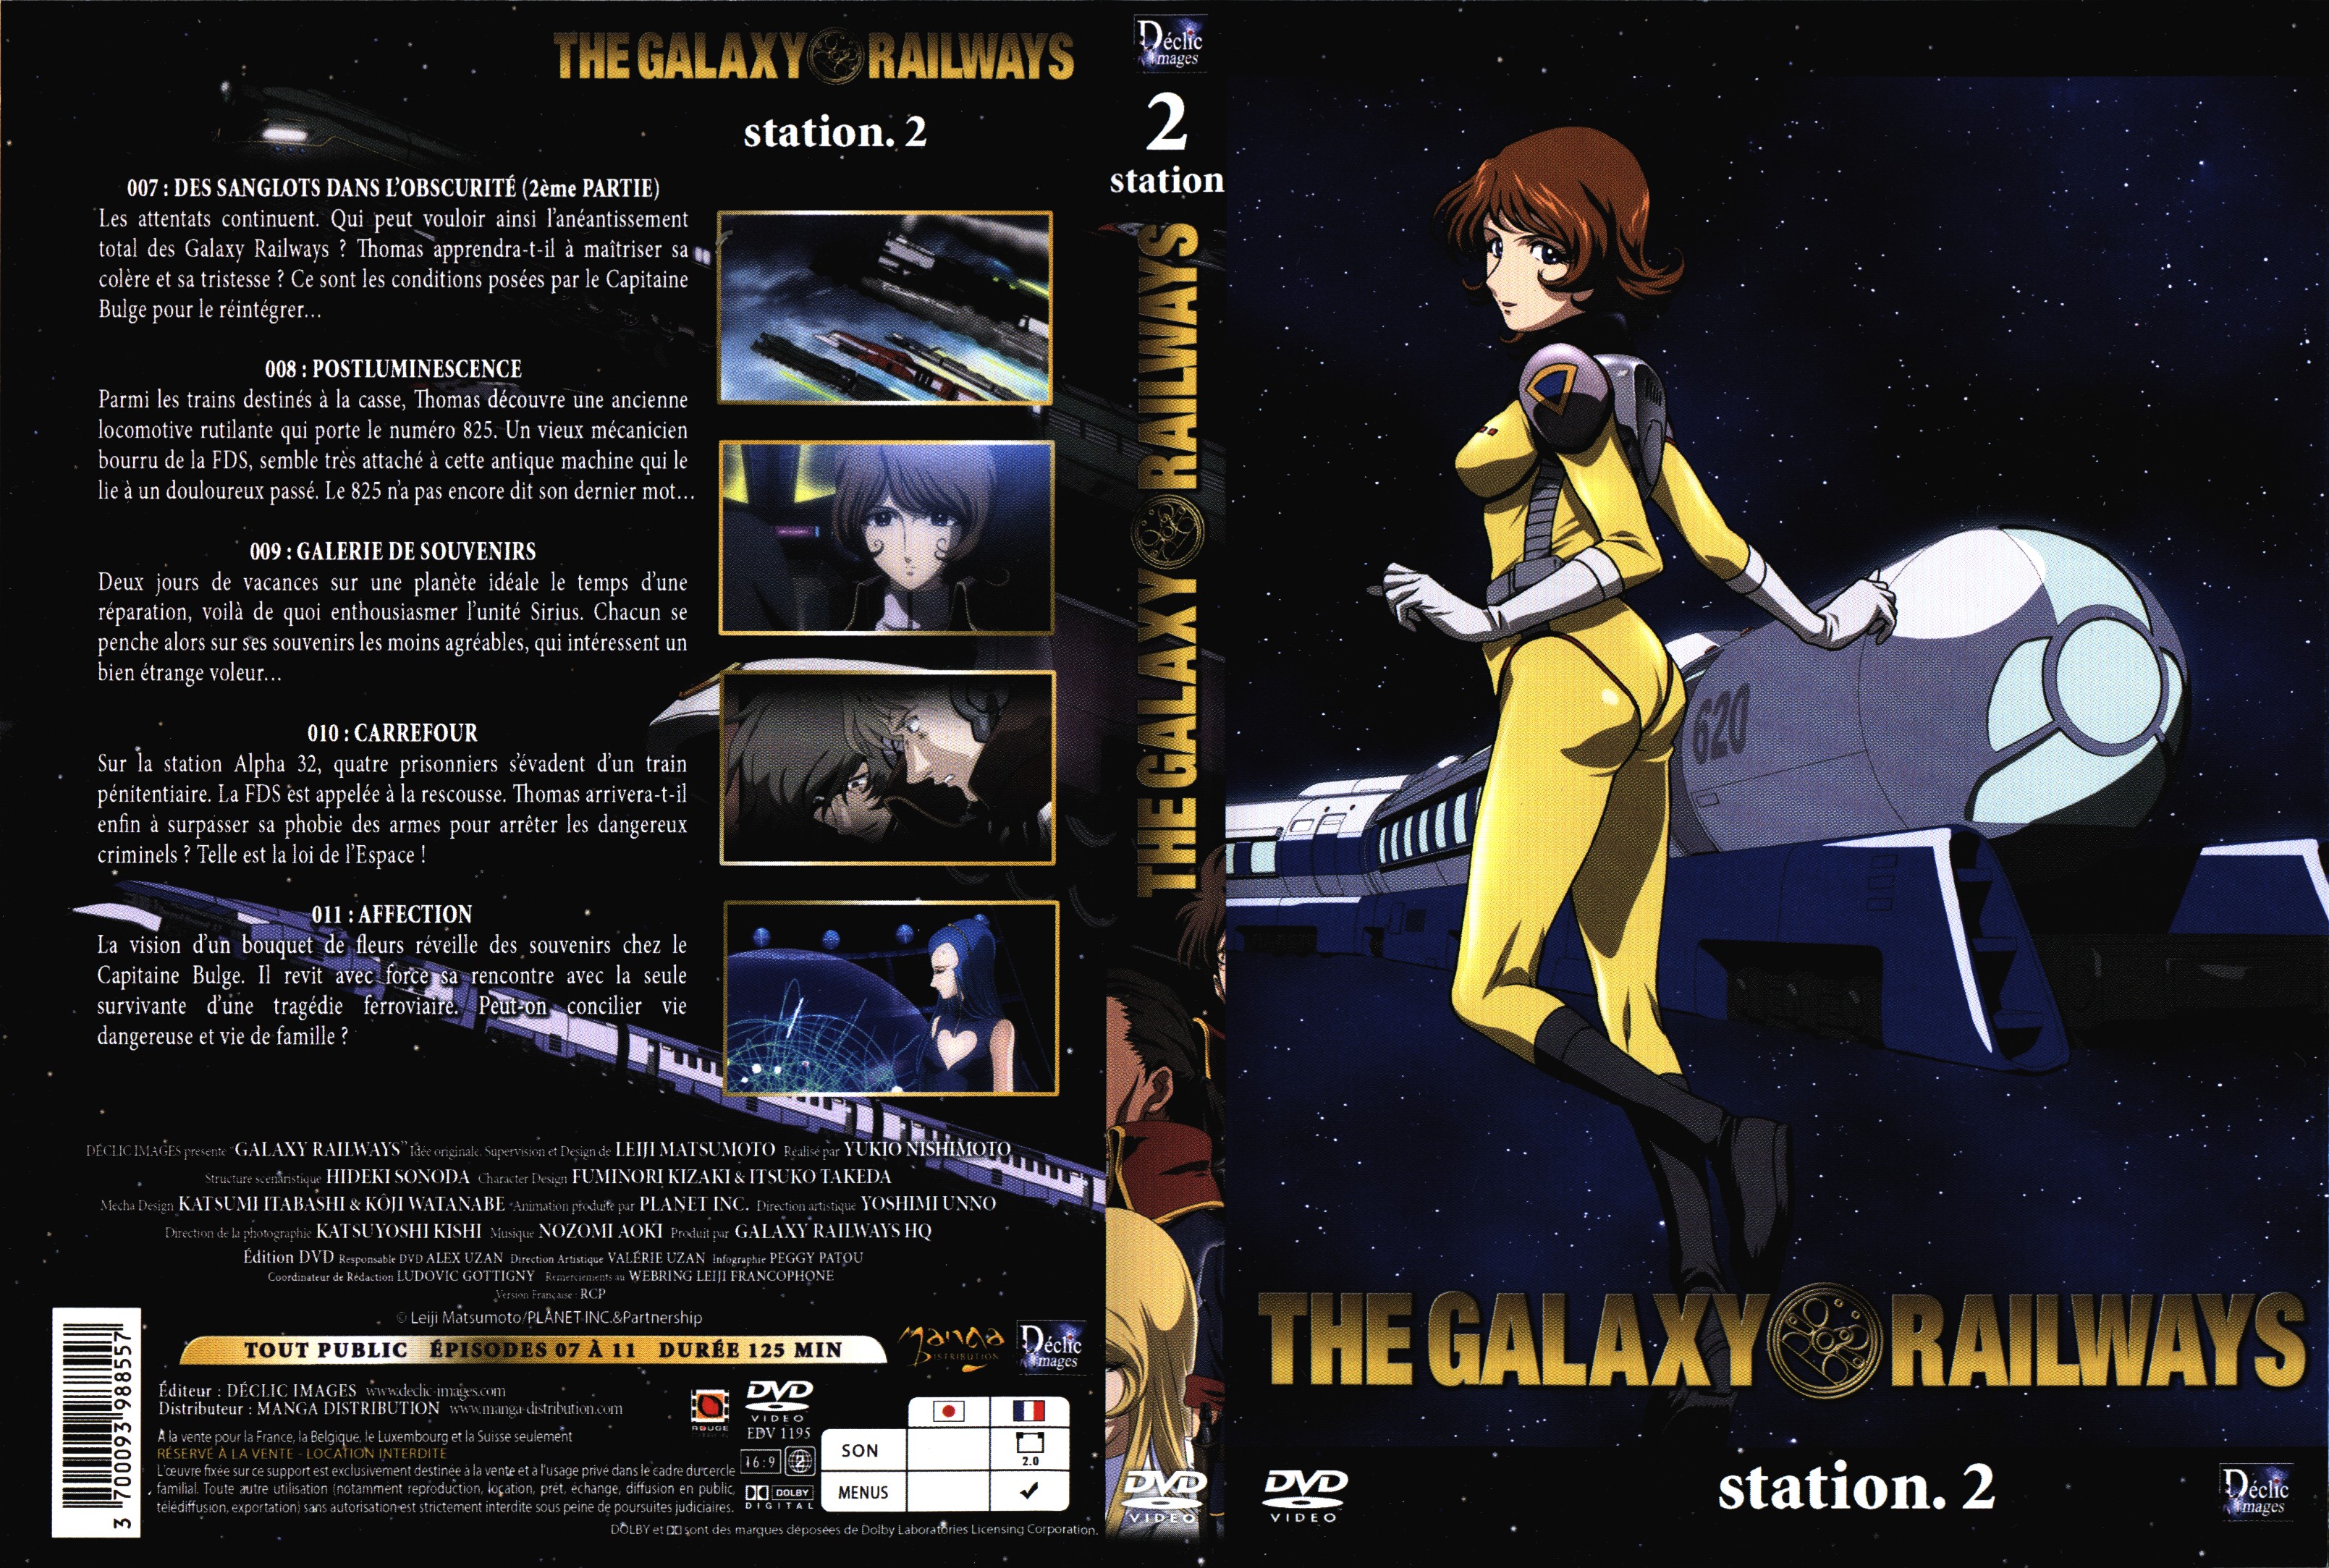 Jaquette DVD The galaxy railways station 2